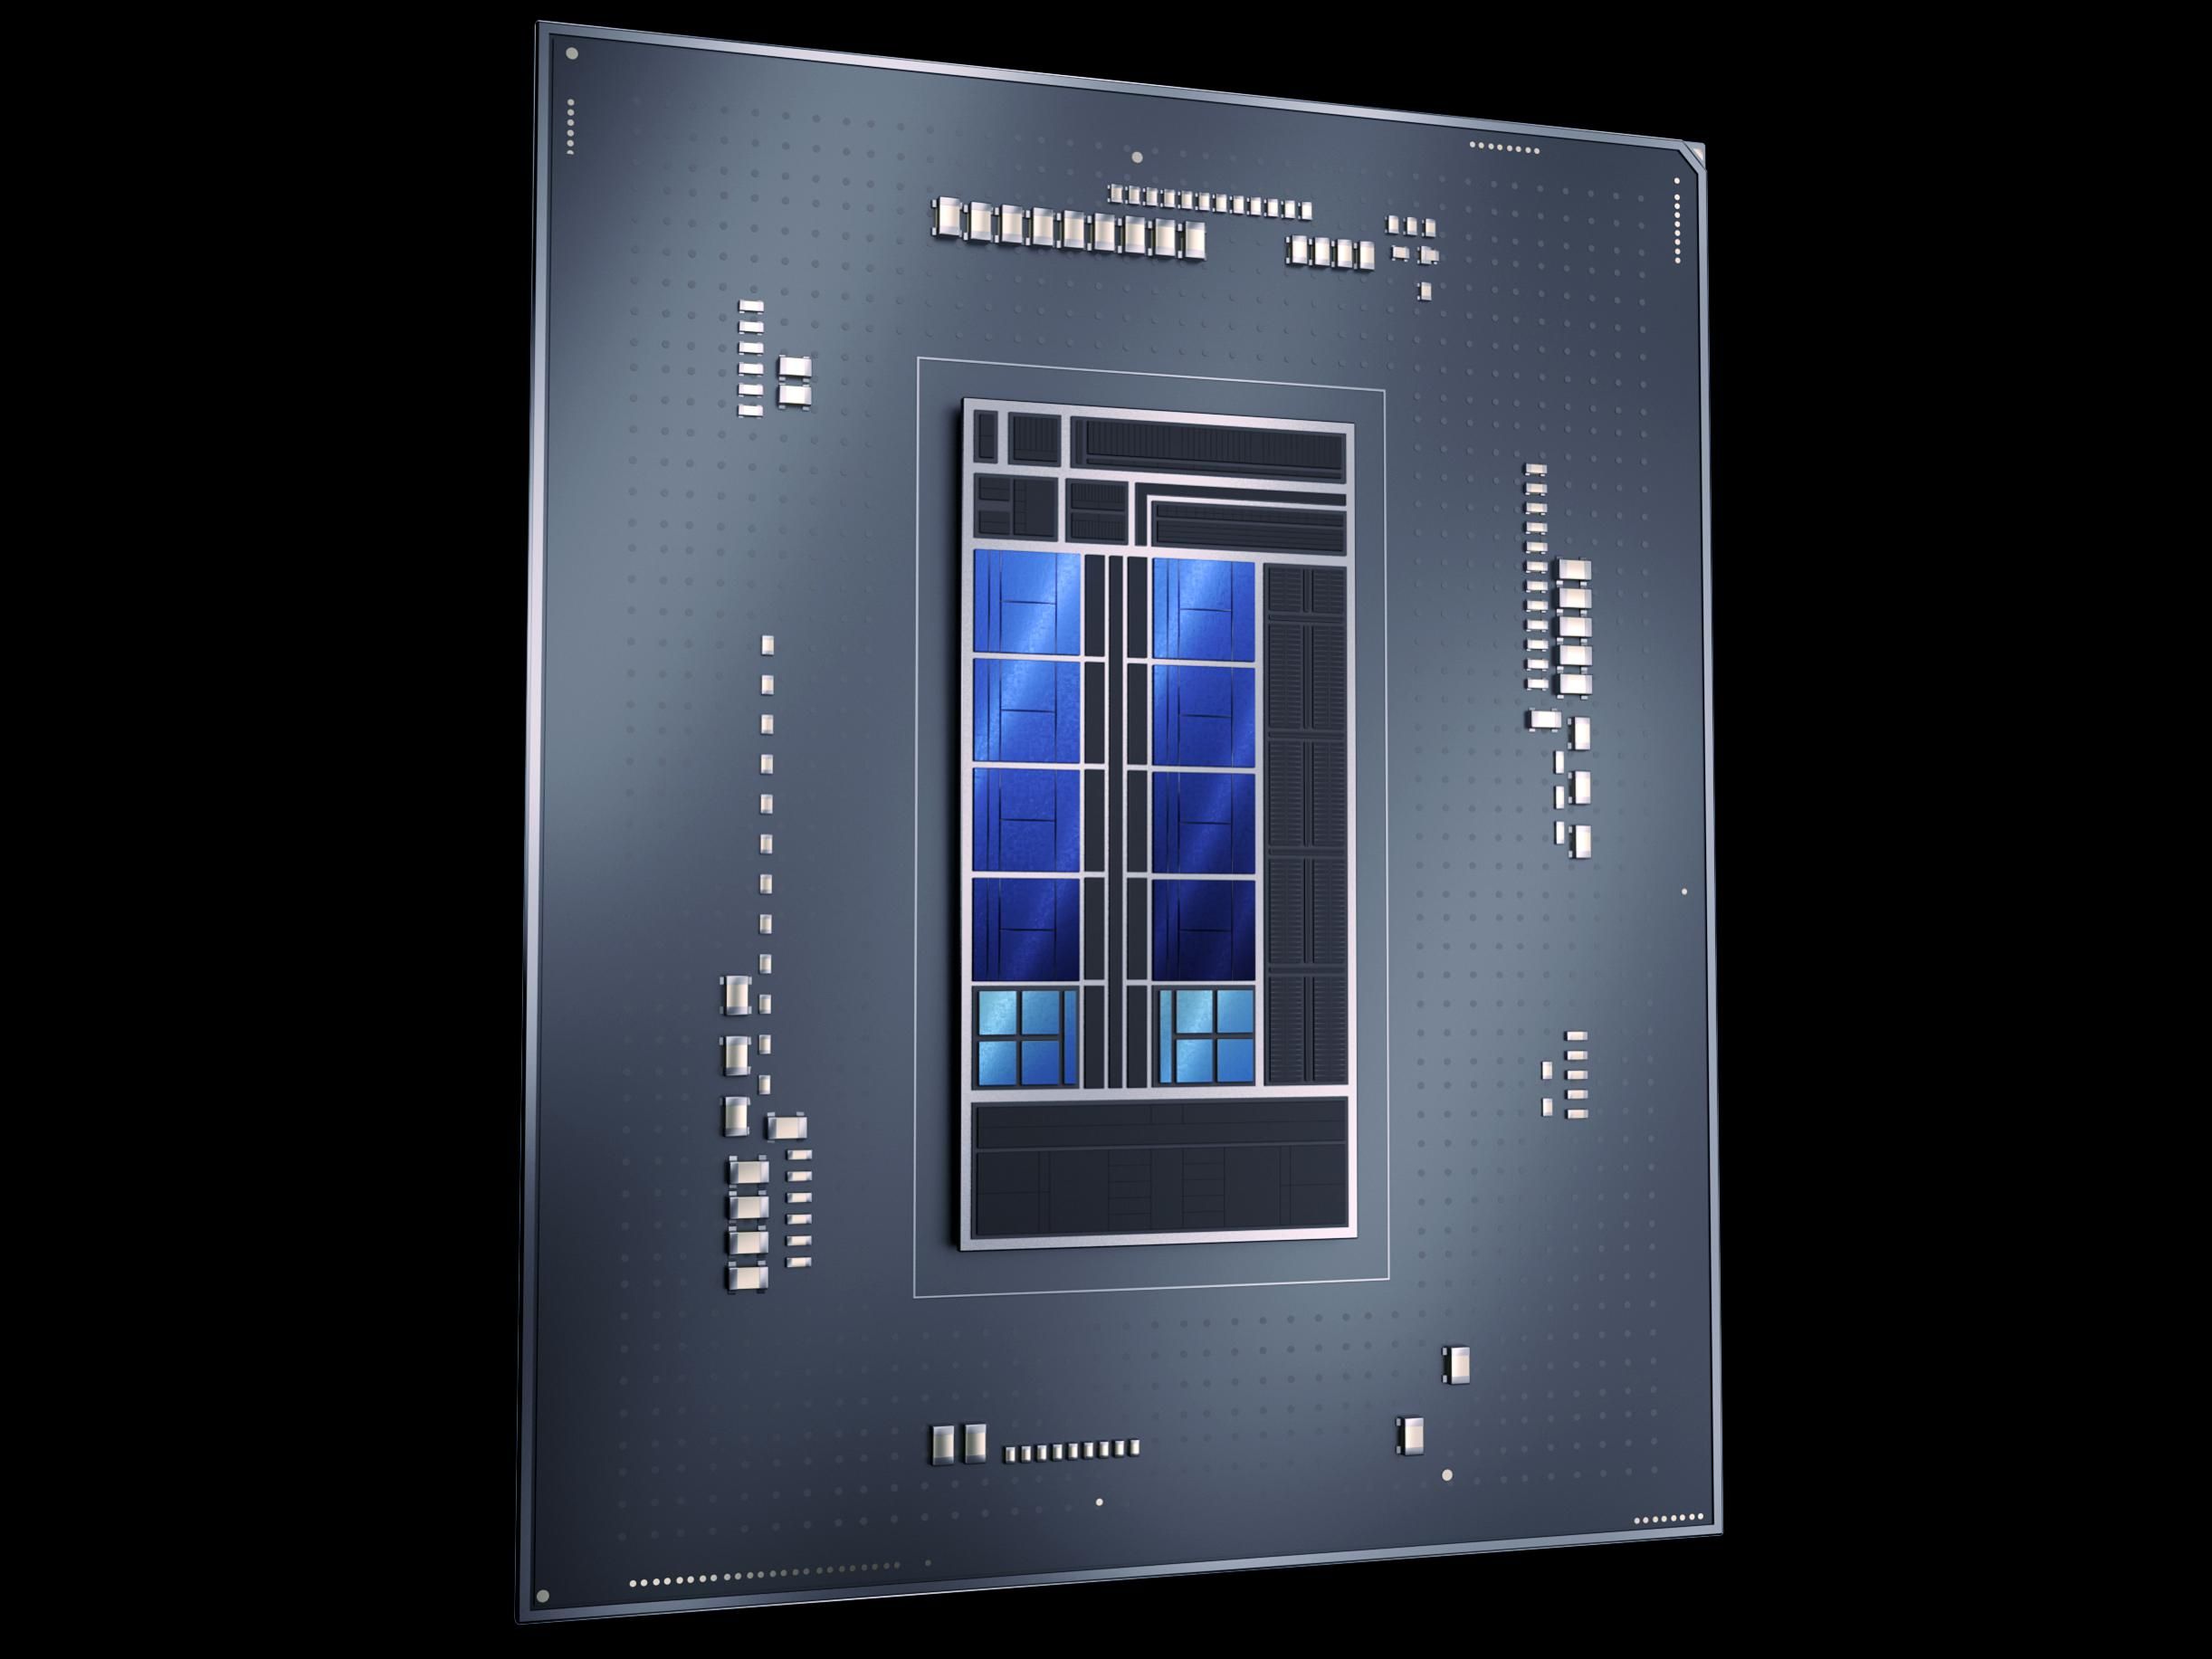 Image of an Intel chip